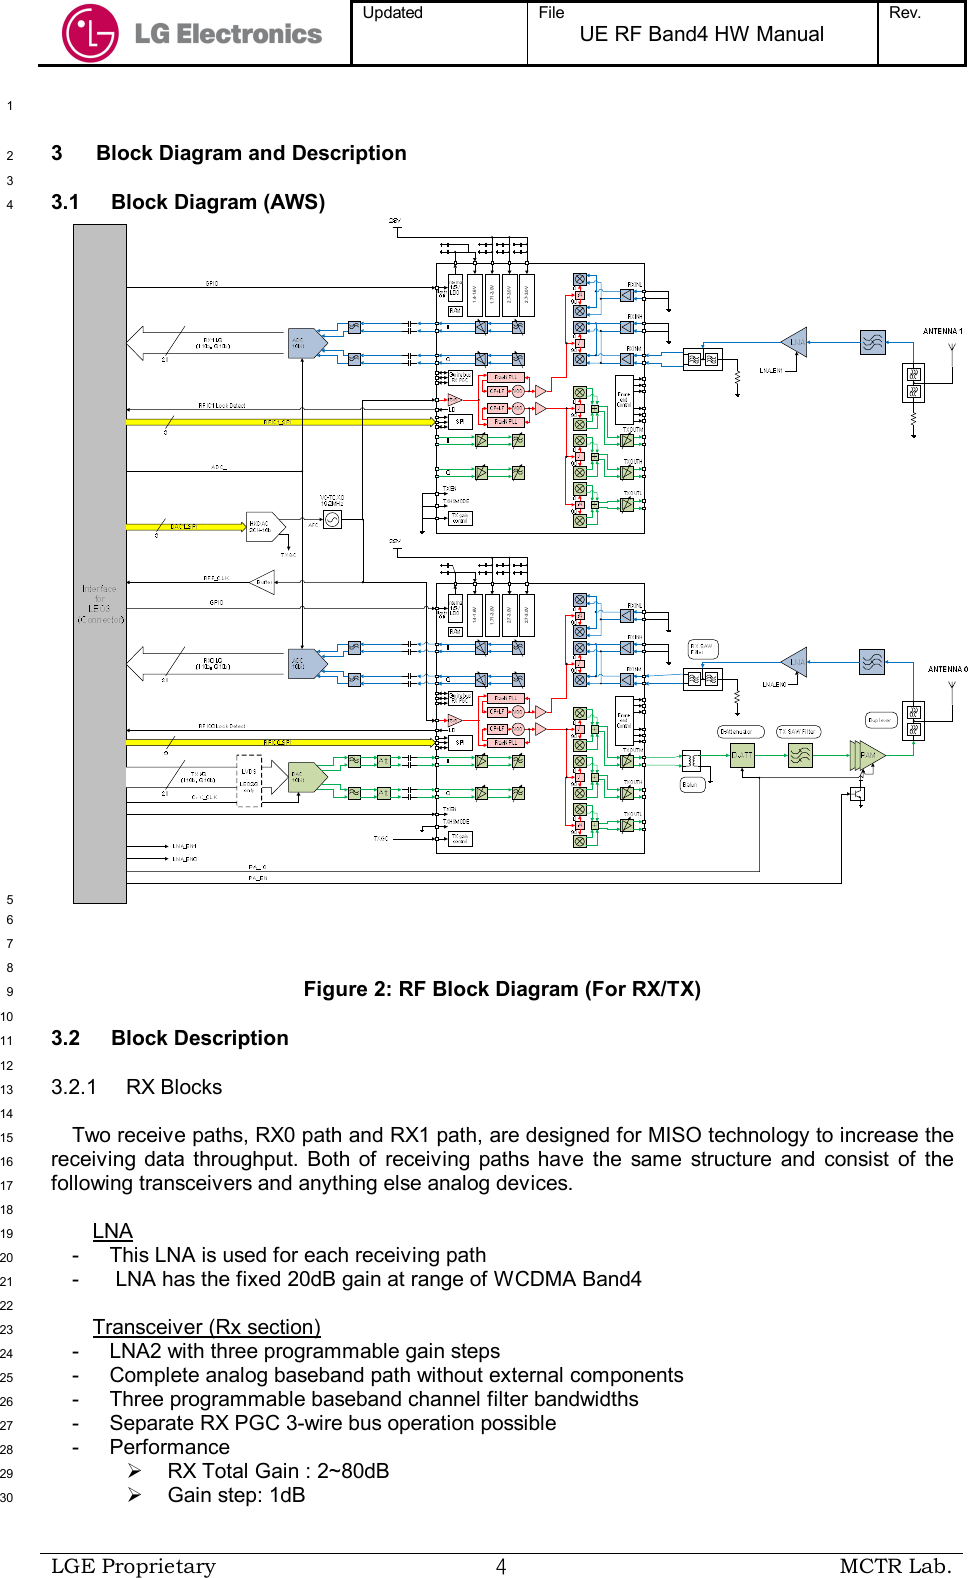  Updated  File UE RF Band4 HW Manual Rev.    LGE Proprietary  ４ MCTR Lab.   1 3  Block Diagram and Description 2  3 3.1  Block Diagram (AWS) 4 2.7-3.0V2.7-3.0V 1.71-3.0V1.4-1.6V 2.7-3.0V 2.7-3.0V1.71-3.0V1.4-1.6V5  6  7  8 Figure 2: RF Block Diagram (For RX/TX) 9  10 3.2  Block Description 11  12 3.2.1  RX Blocks 13  14 Two receive paths, RX0 path and RX1 path, are designed for MISO technology to increase the 15 receiving data throughput.  Both  of  receiving  paths have  the  same  structure  and  consist  of  the 16 following transceivers and anything else analog devices. 17  18 LNA 19 -  This LNA is used for each receiving path 20 -   LNA has the fixed 20dB gain at range of WCDMA Band4 21  22 Transceiver (Rx section) 23 -  LNA2 with three programmable gain steps 24 -  Complete analog baseband path without external components 25 -  Three programmable baseband channel filter bandwidths 26 -  Separate RX PGC 3-wire bus operation possible 27 -  Performance 28   RX Total Gain : 2~80dB 29   Gain step: 1dB  30 